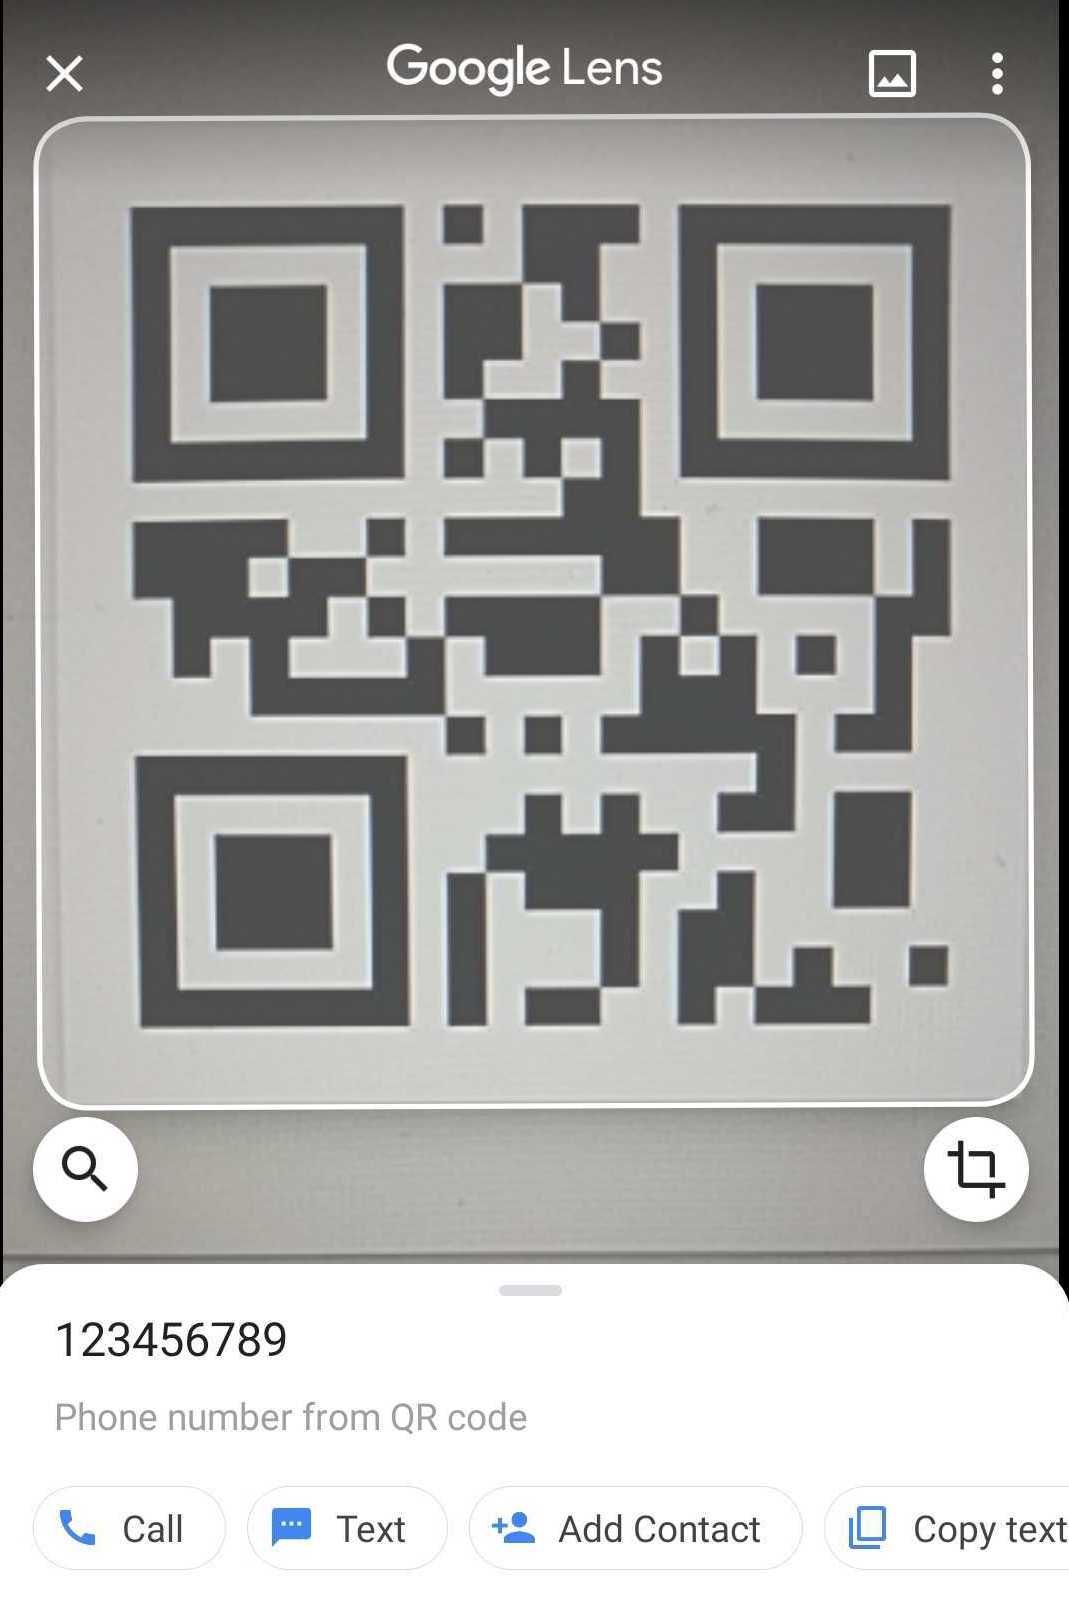 Google Lens QR Code scanned response for a telephone number